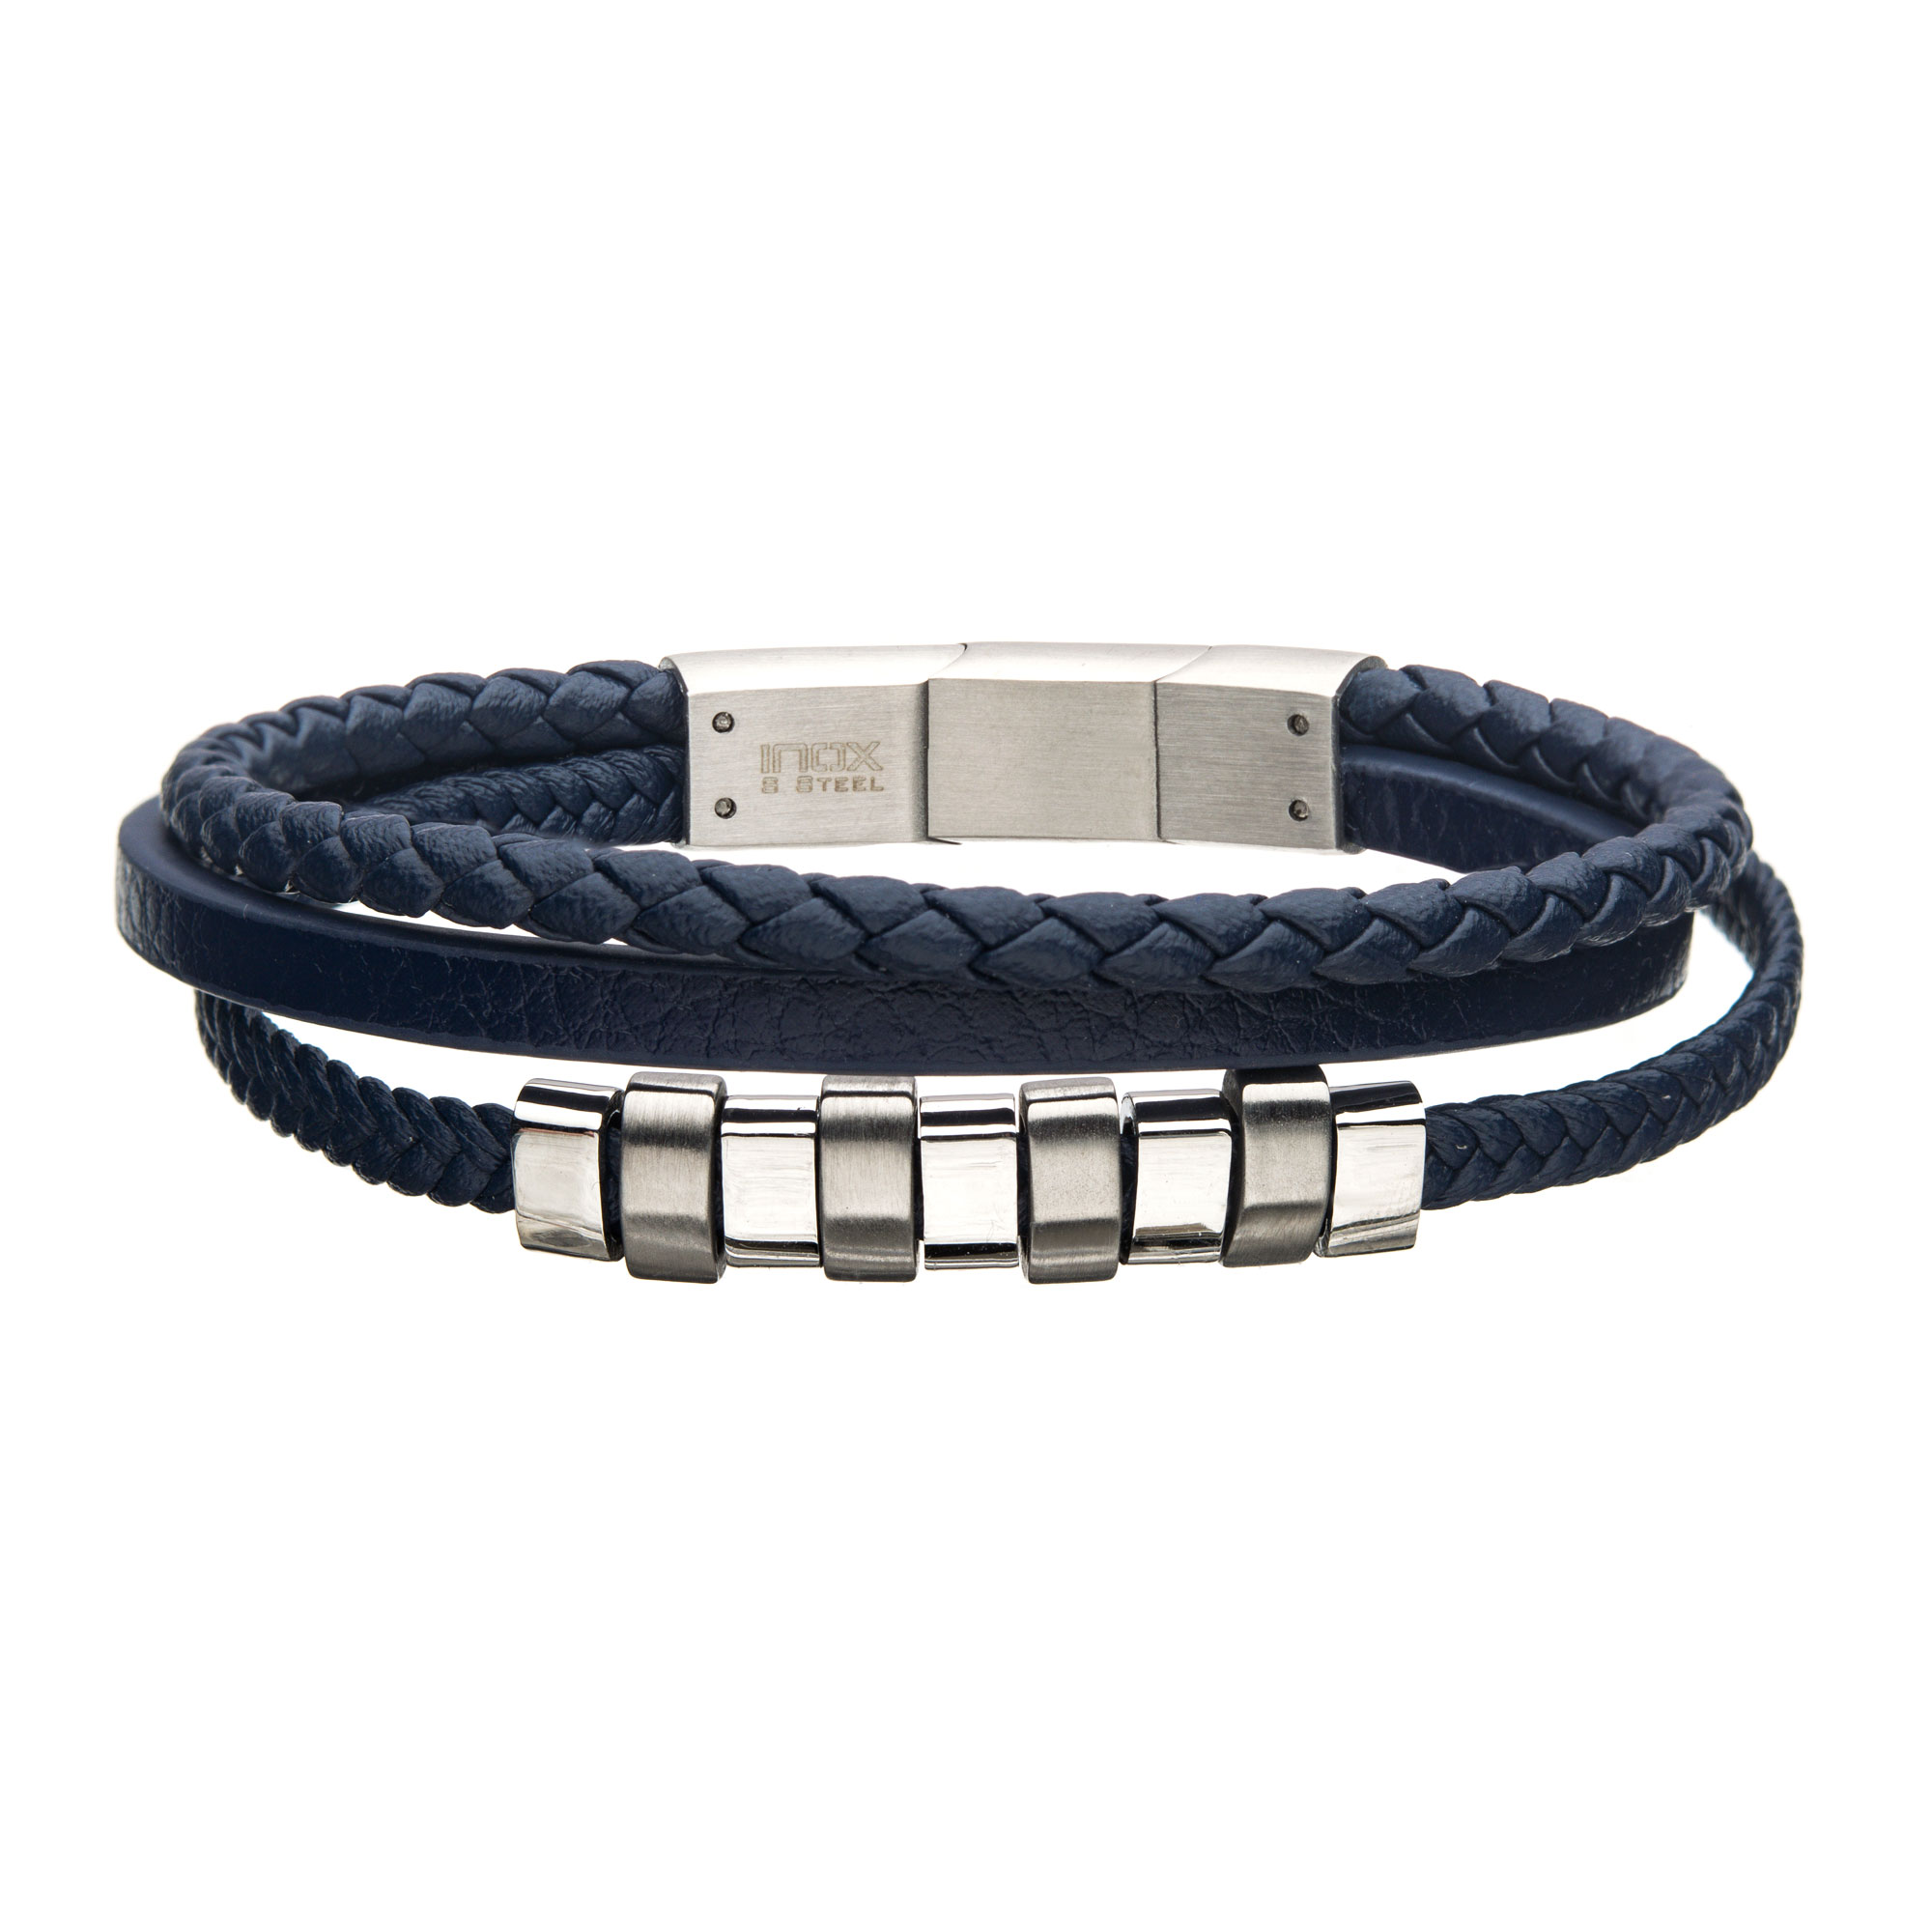 Blue Braided Multi Leather with Steel Beads Bracelet Morin Jewelers Southbridge, MA